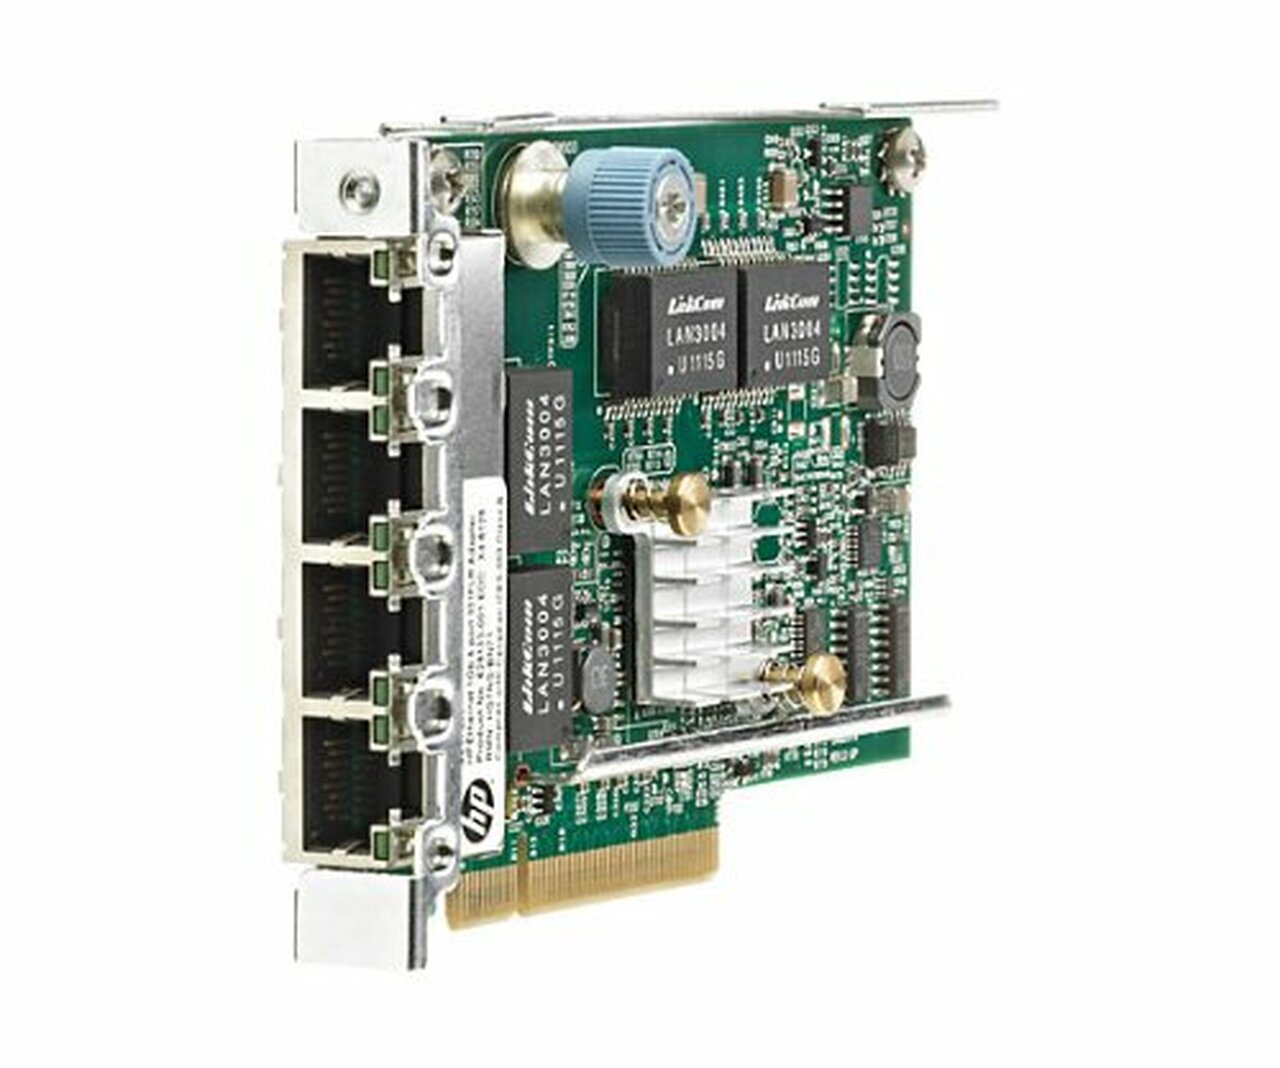 HPE 629135-B21 Ethernet 1gb 4-port 331flr - Network Adapter - 4 Ports. Refurbished. In Stock.